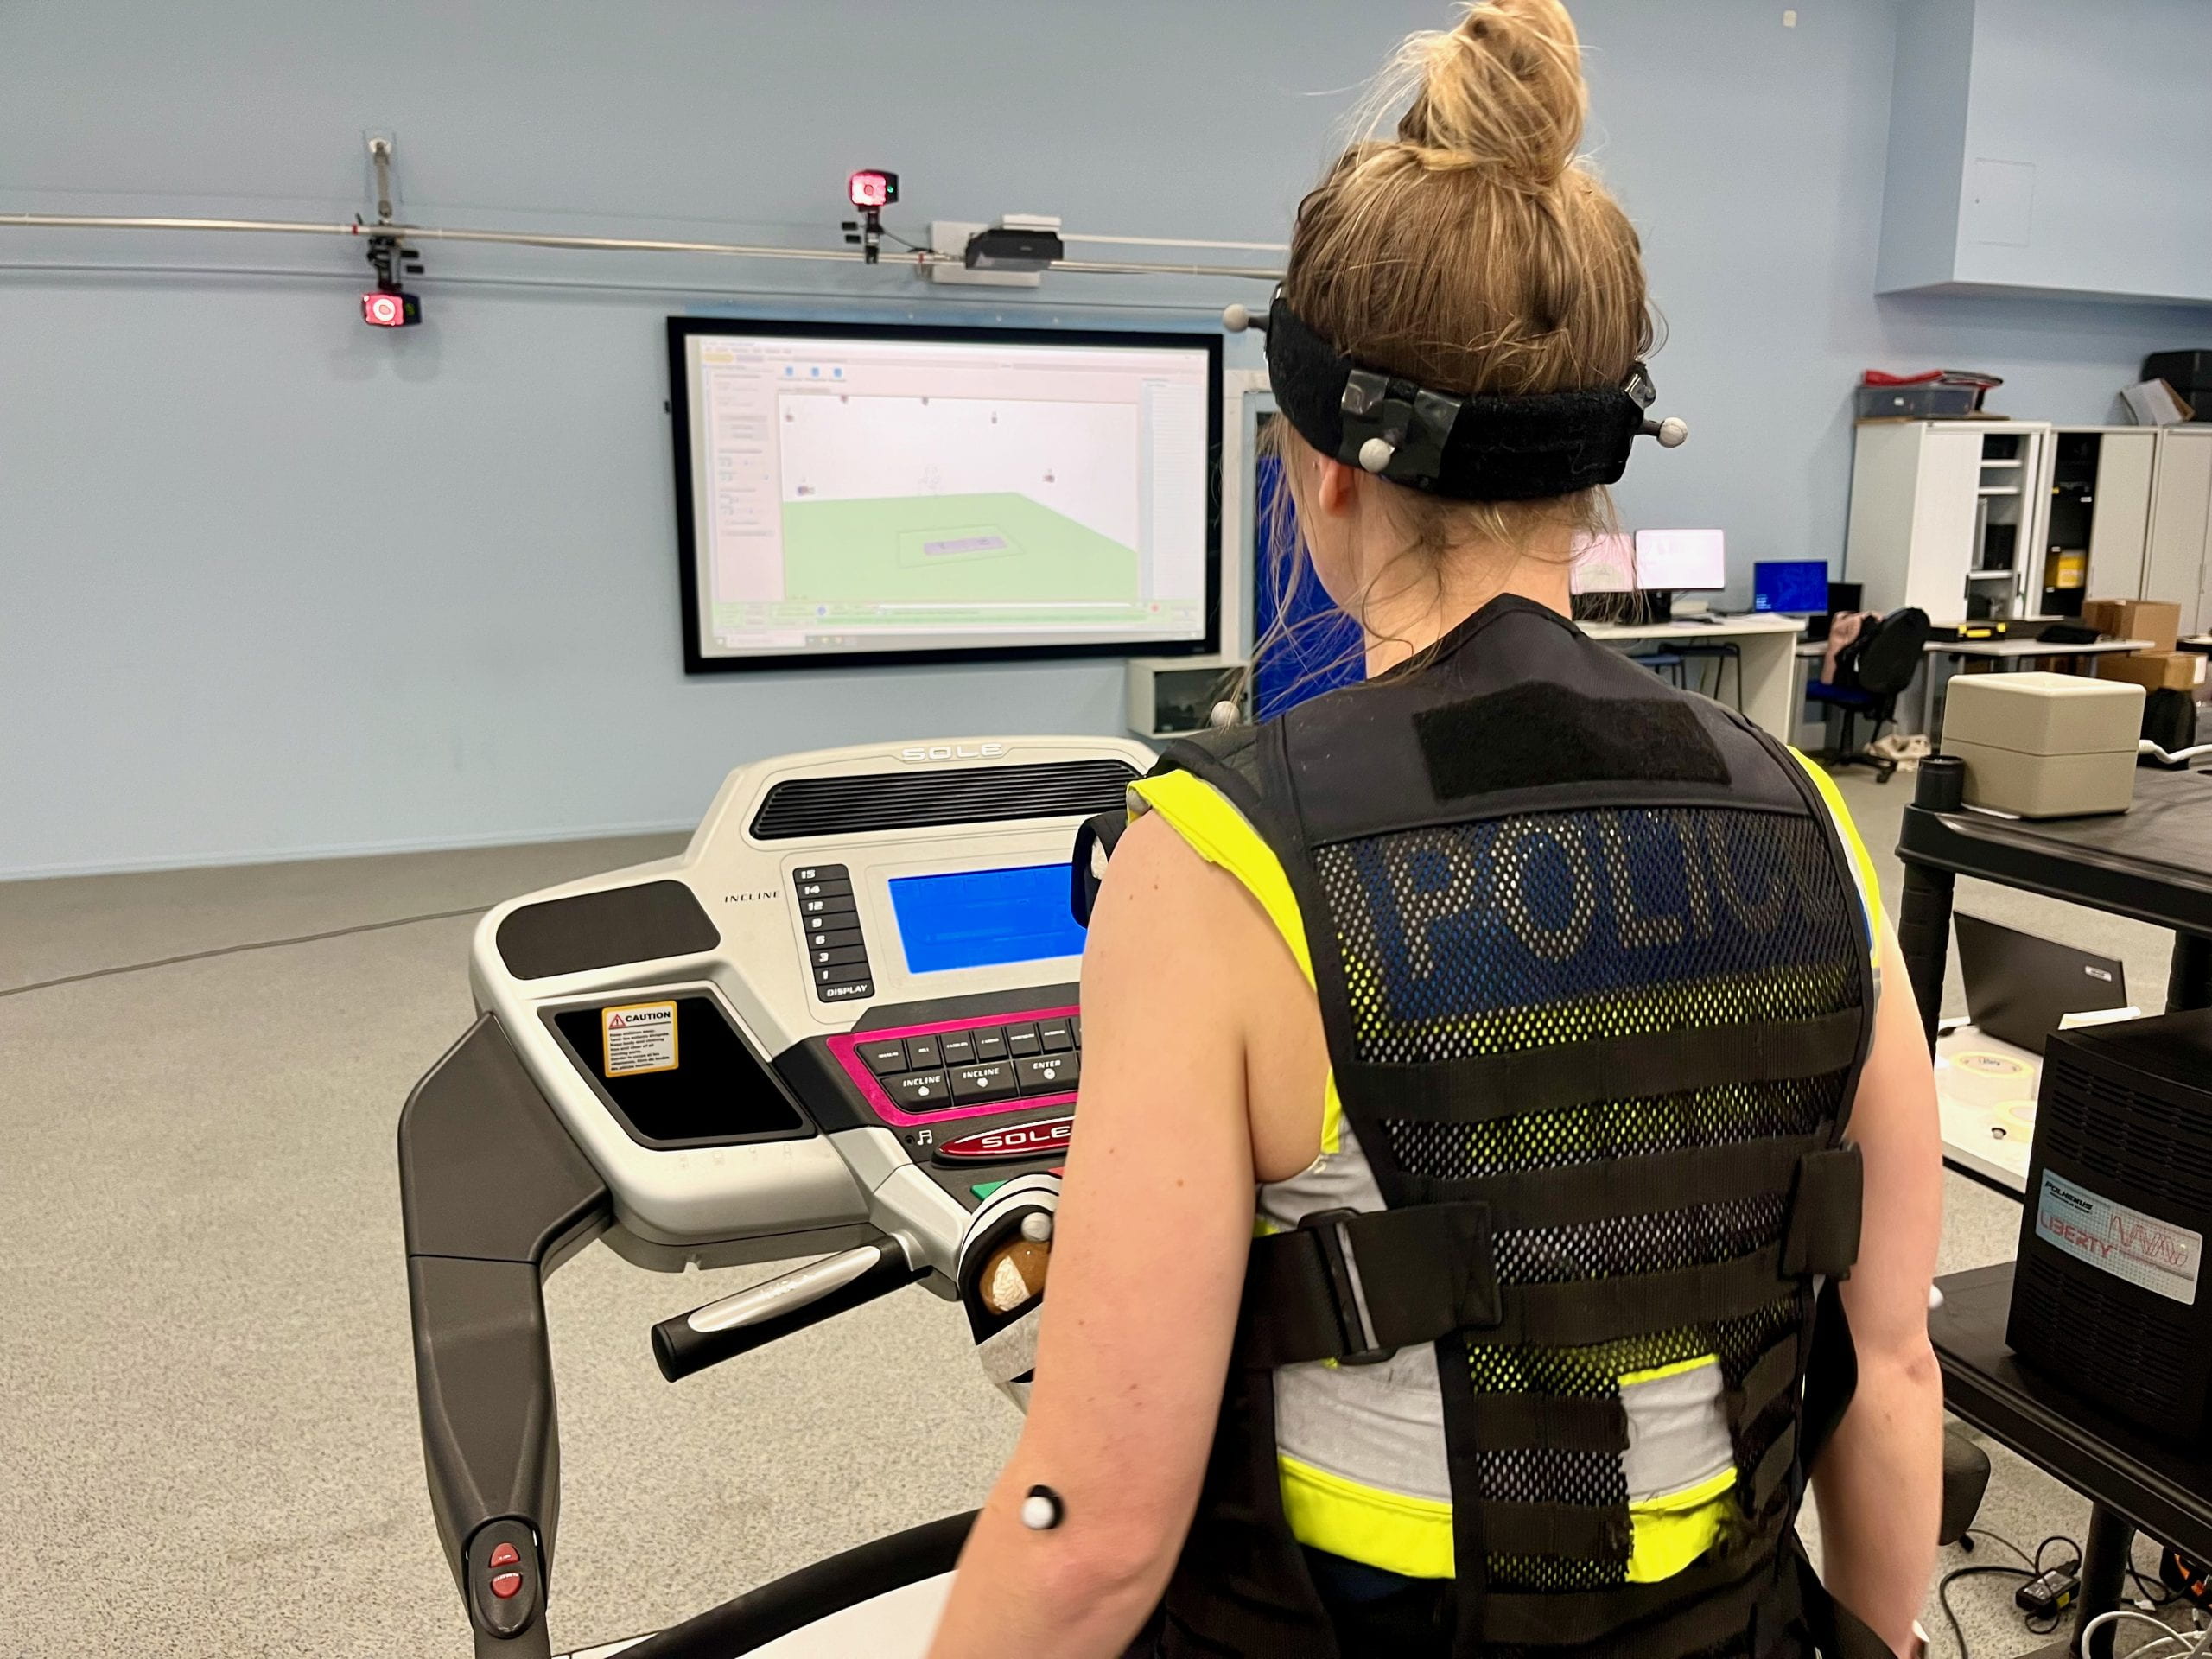 A woman wearing a police vest walks on a treadmill in a motion capture laboratory